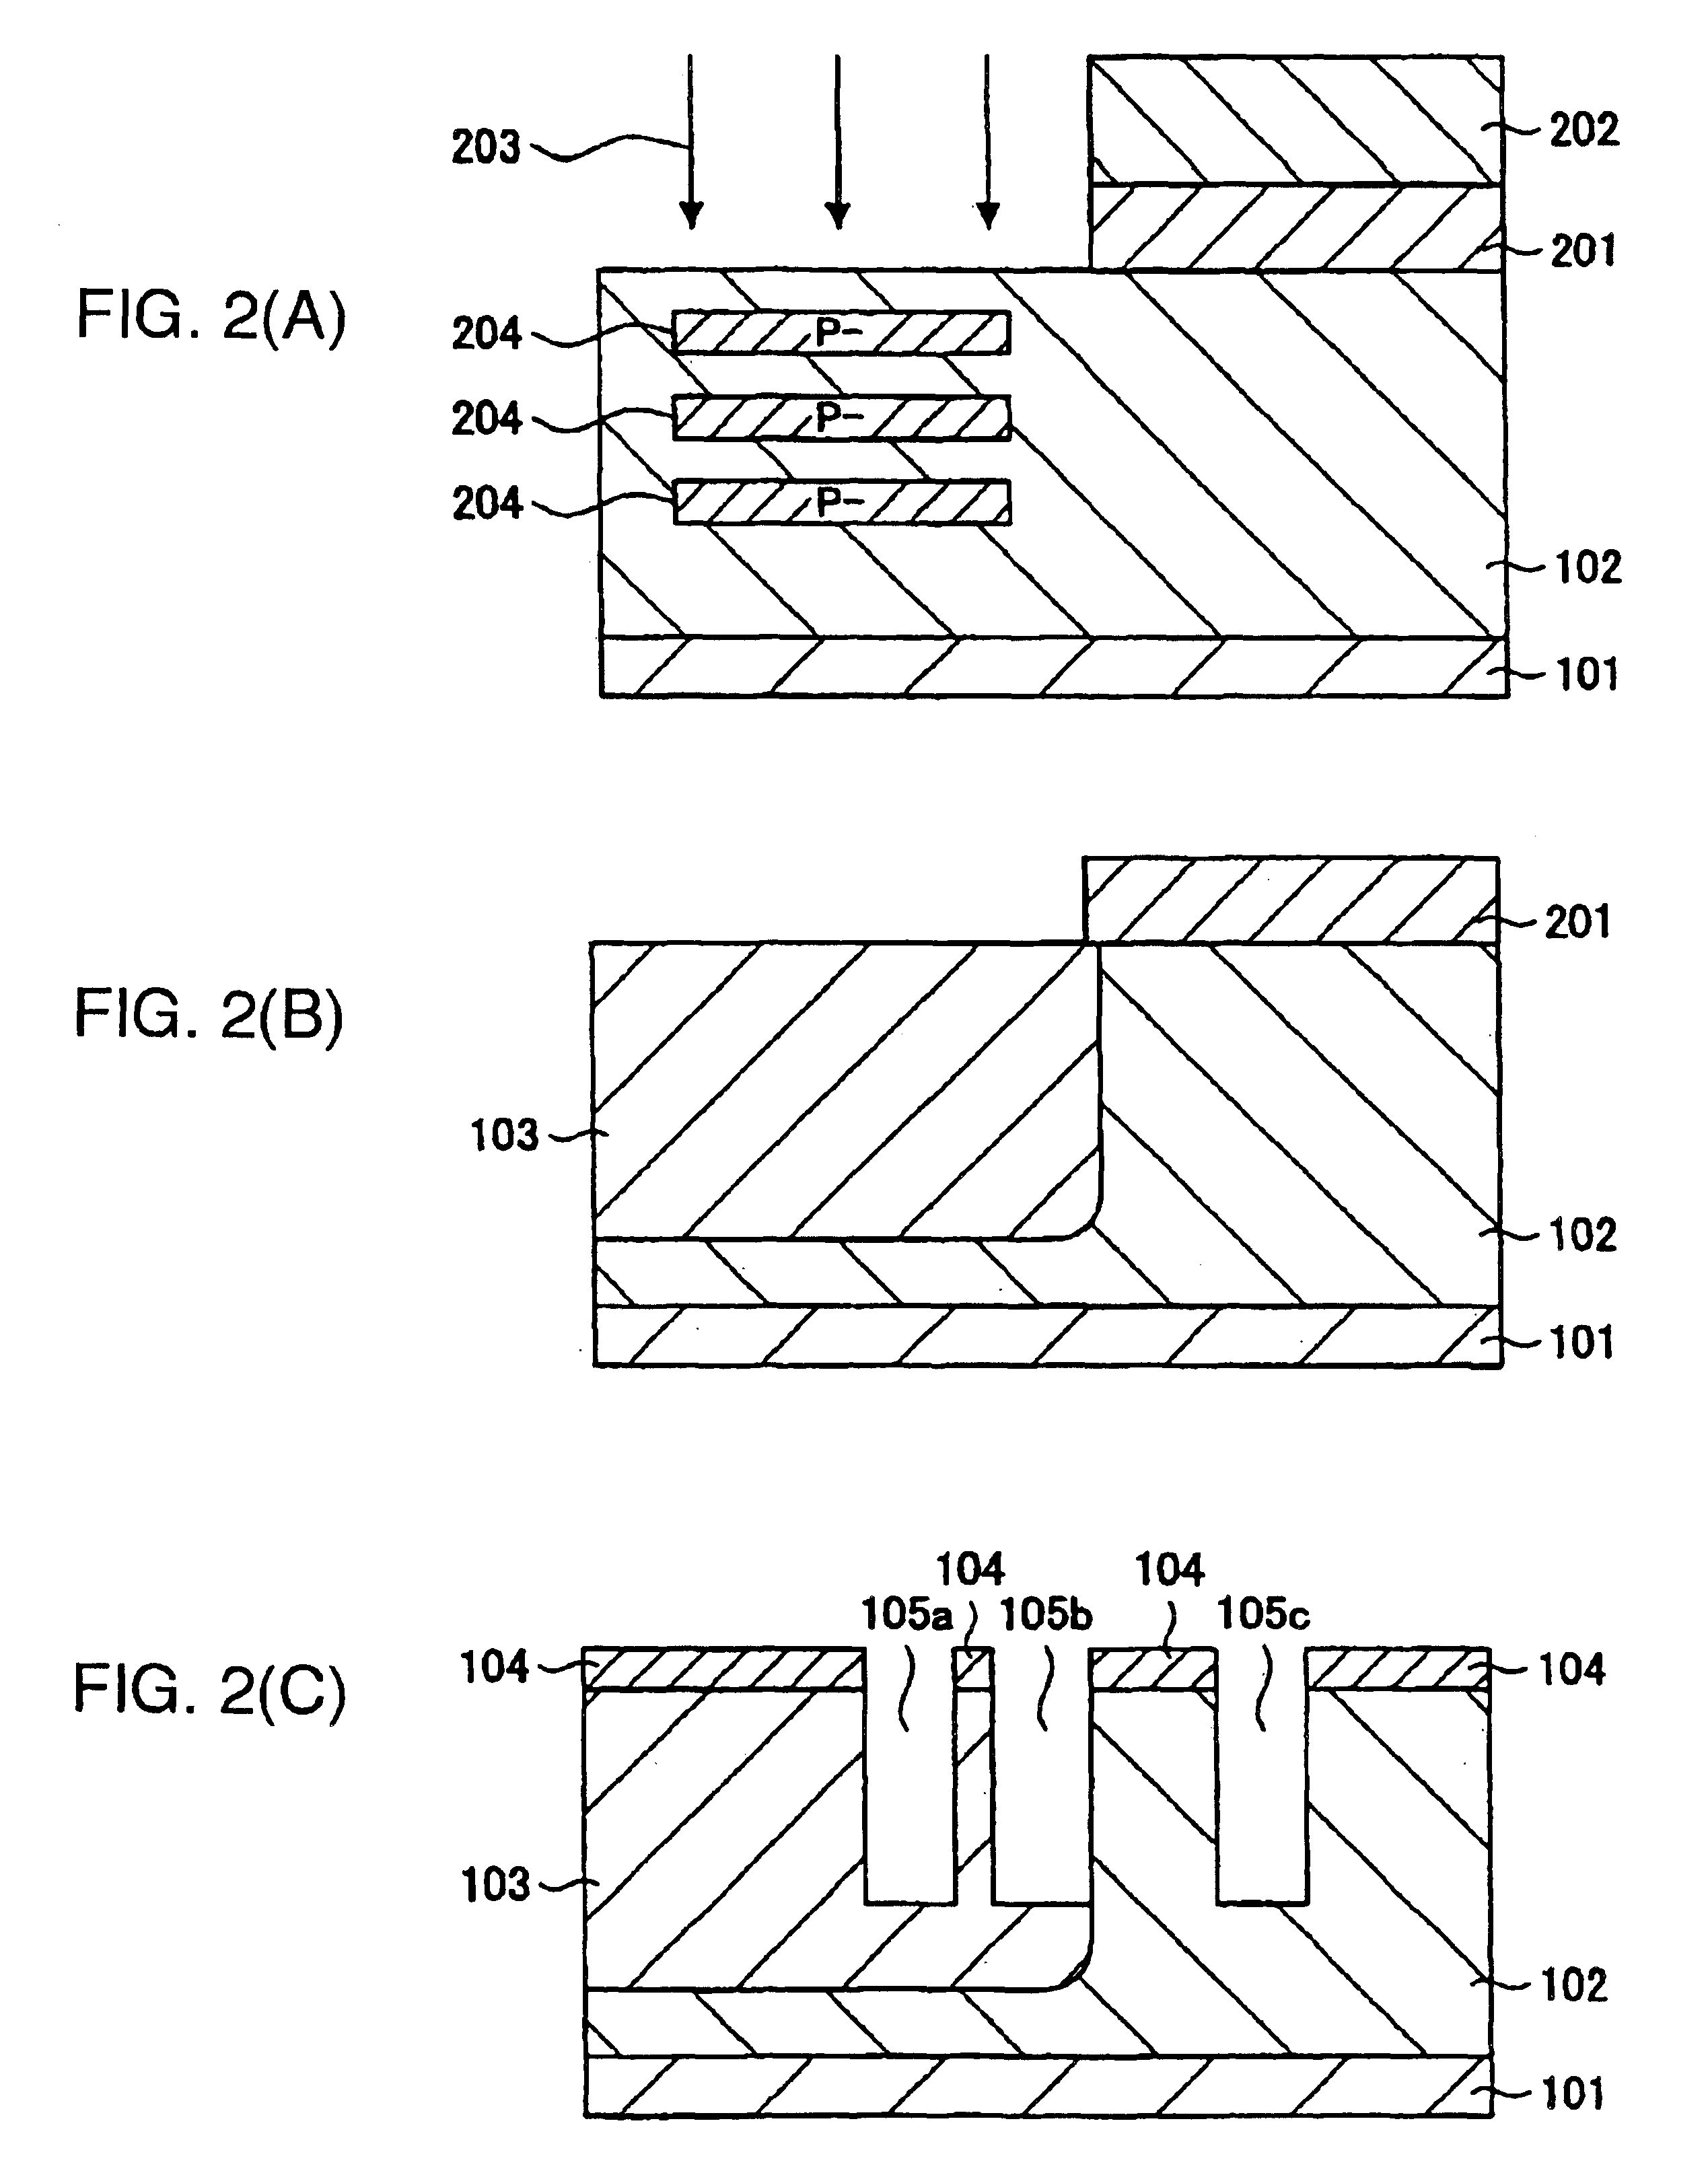 Structure of a lateral diffusion MOS transistor in widespread use as a power control device